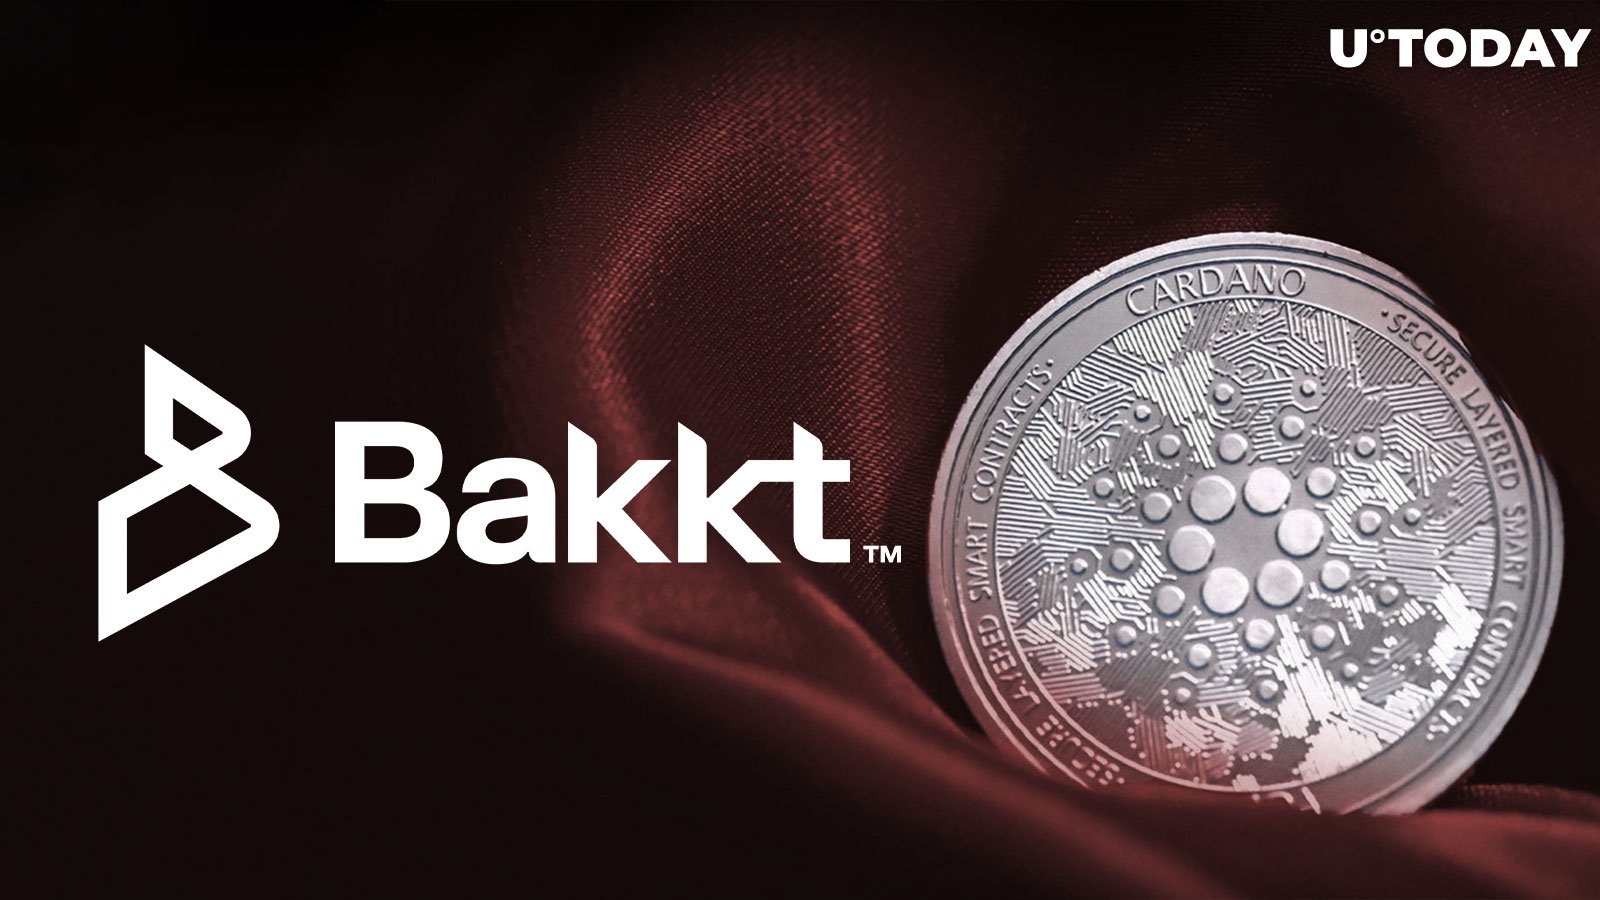 Cardano (ADA), Solana (SOL) and Polygon (MATIC) to Be Removed from Bakkt. Here's Why